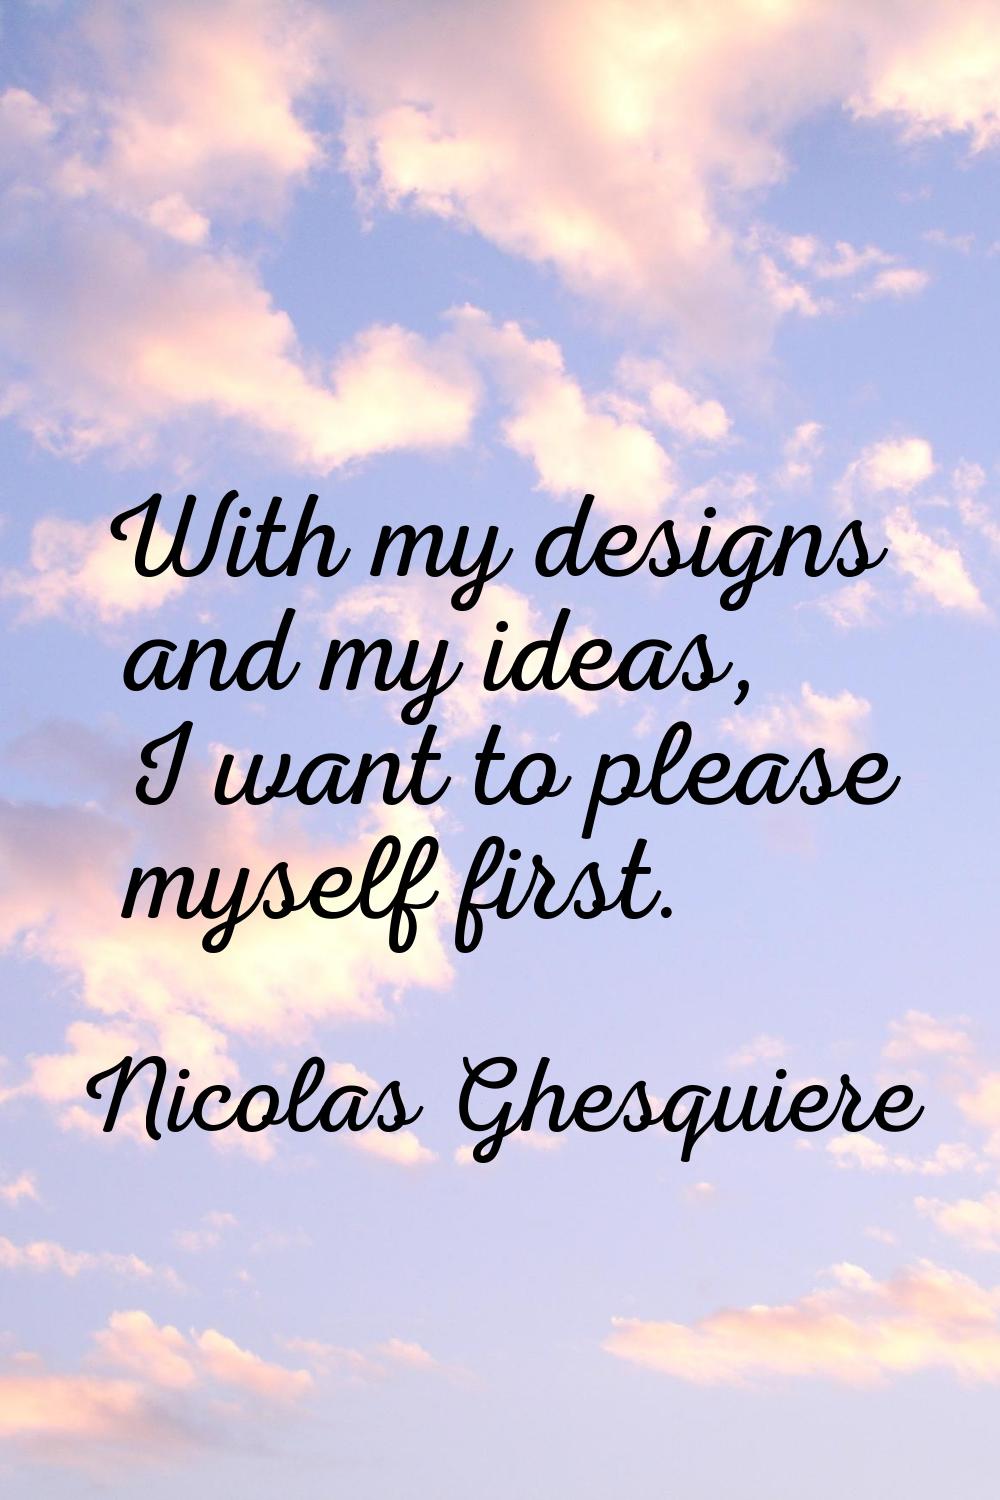 With my designs and my ideas, I want to please myself first.